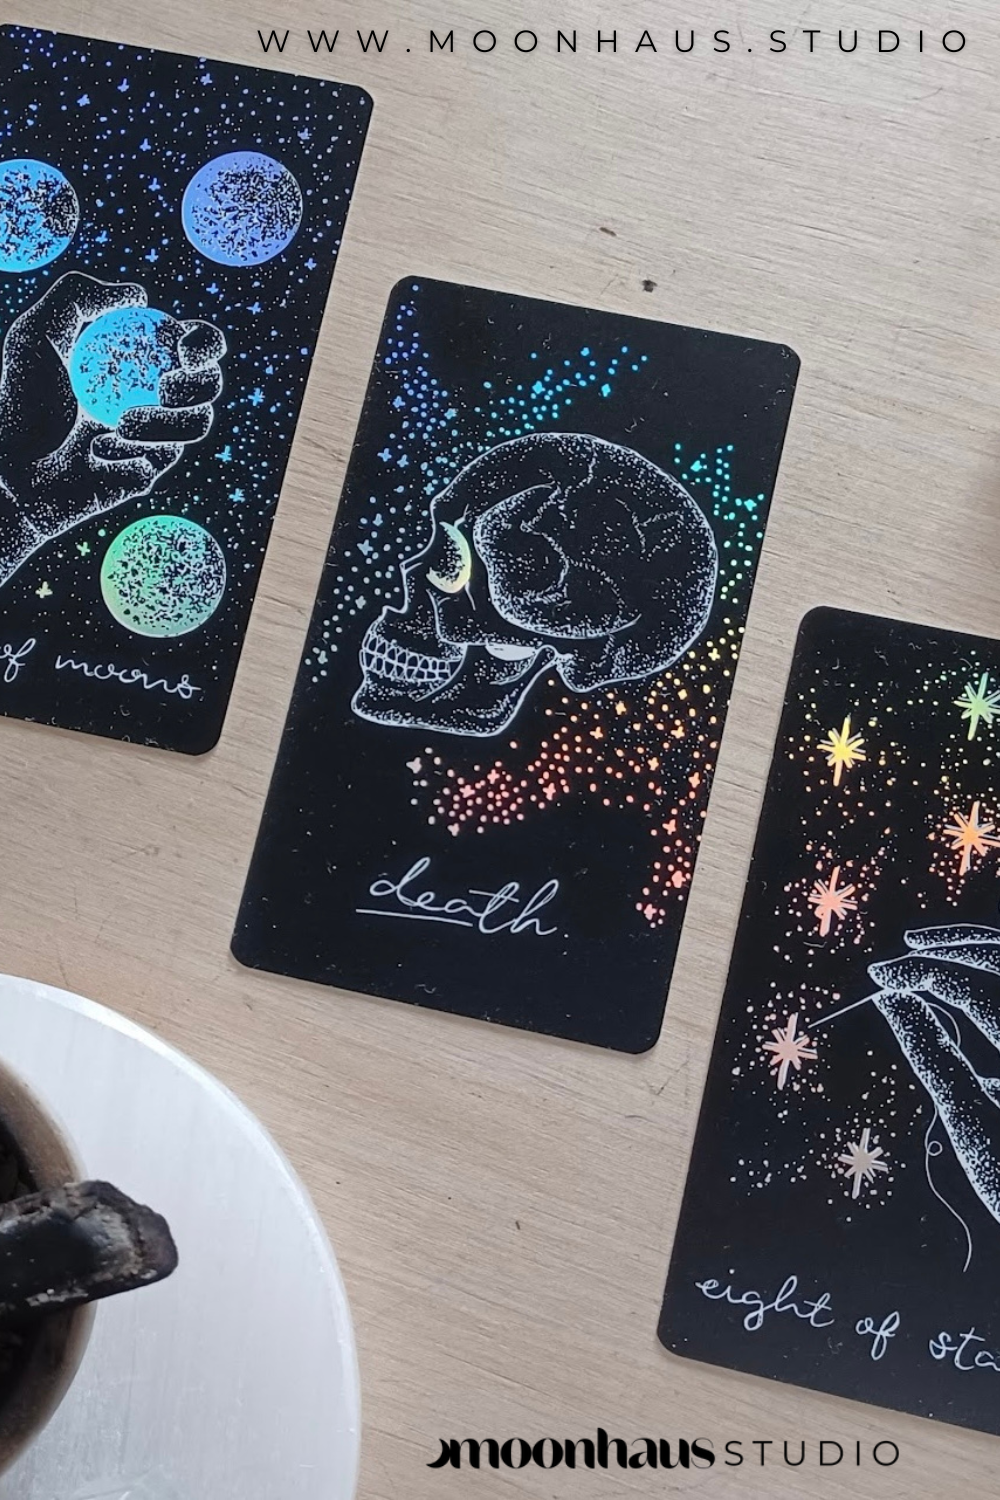 tarot cards deck: beginner decks - learn tarot reading & spreads | black tarot with holographic details, minimalist card art with tarot guide booklet